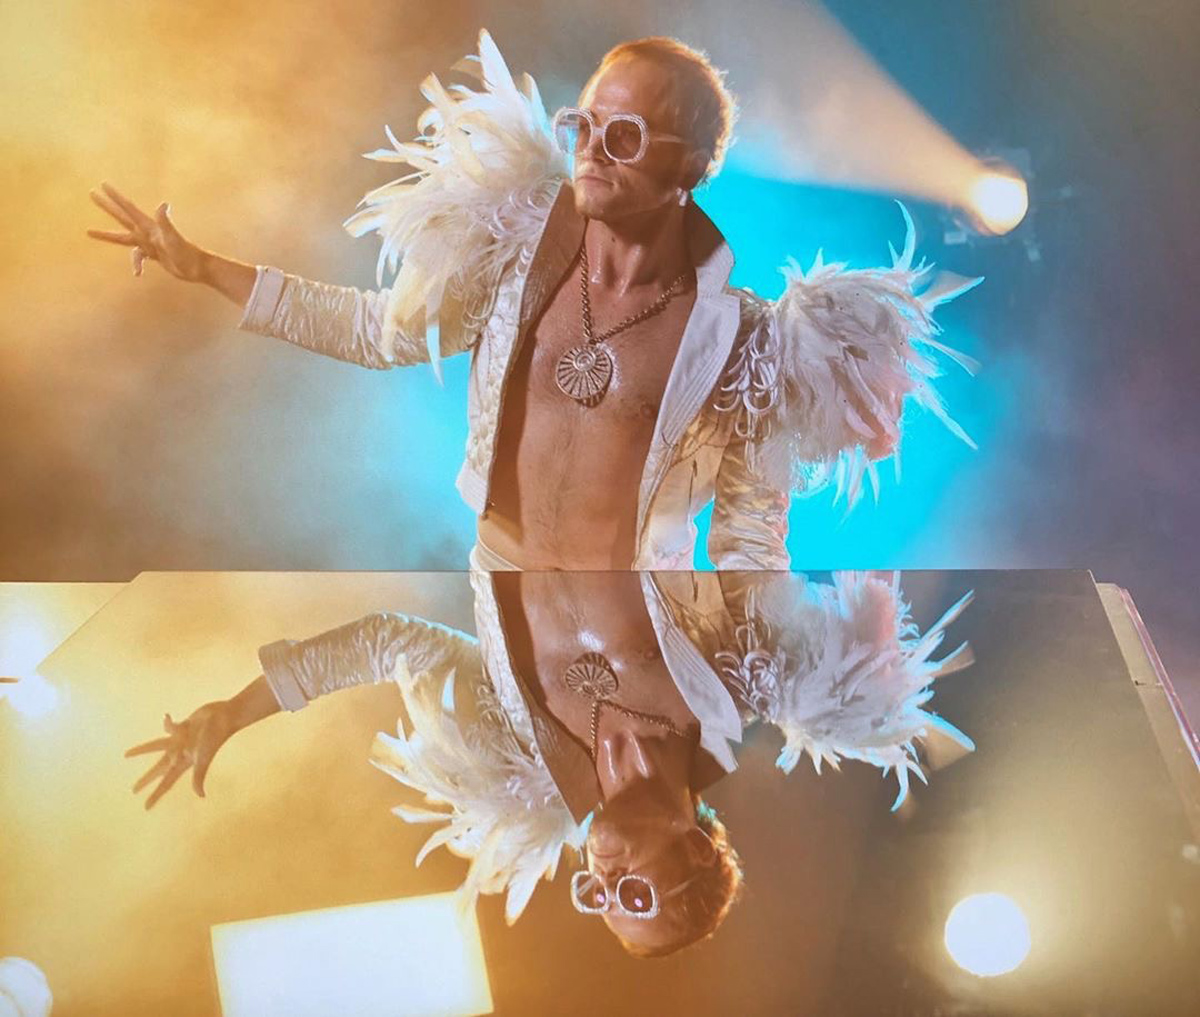 Elton John’s Life Story Is Told In The Stunning Musical Biopic Rocketman Oc Weekly